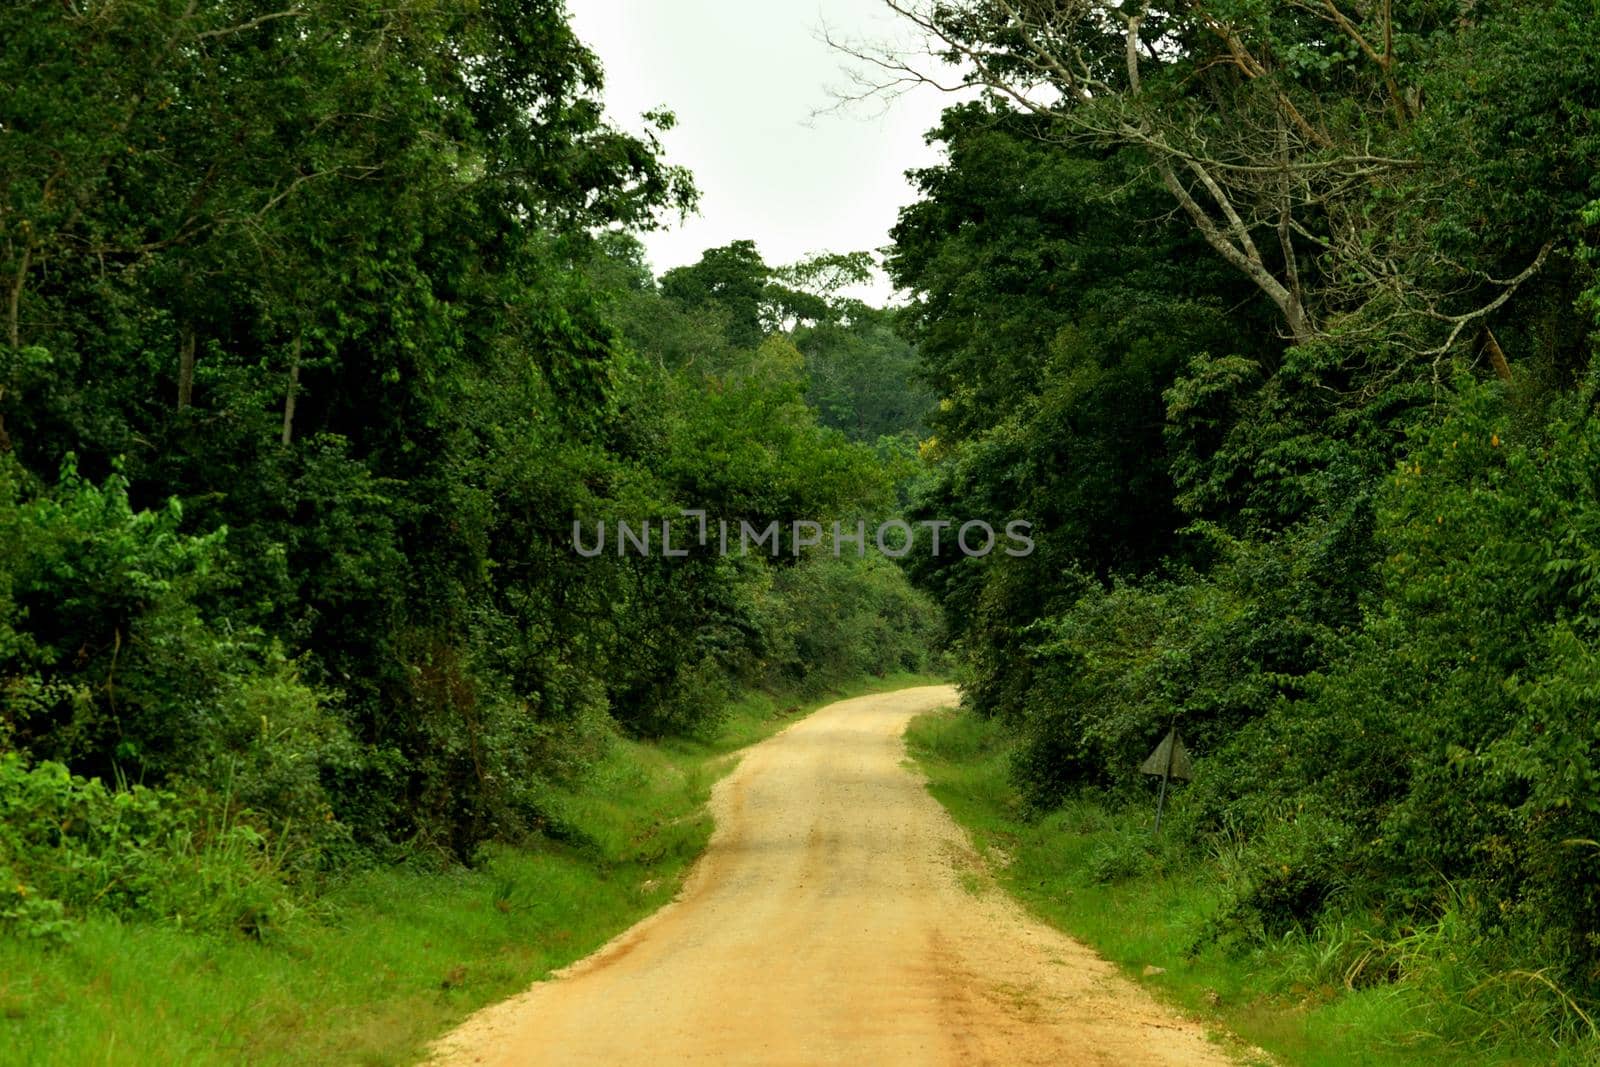 View of Budongo forest and the main street by silentstock639